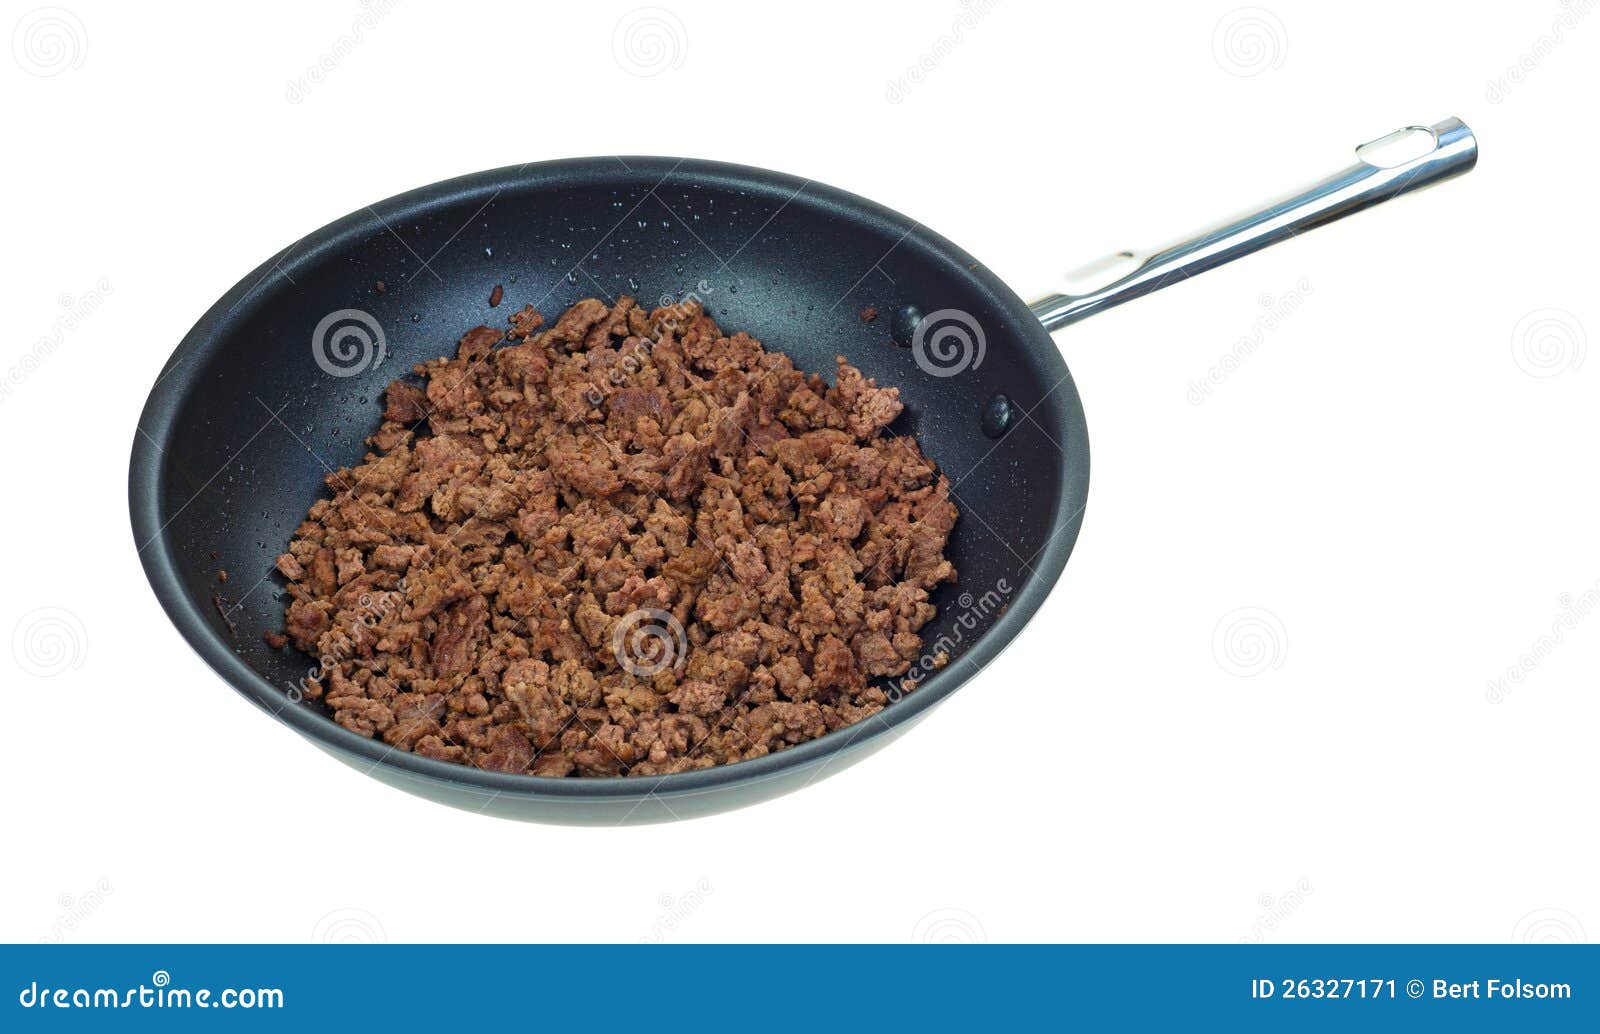 skillet with cooked ground beef